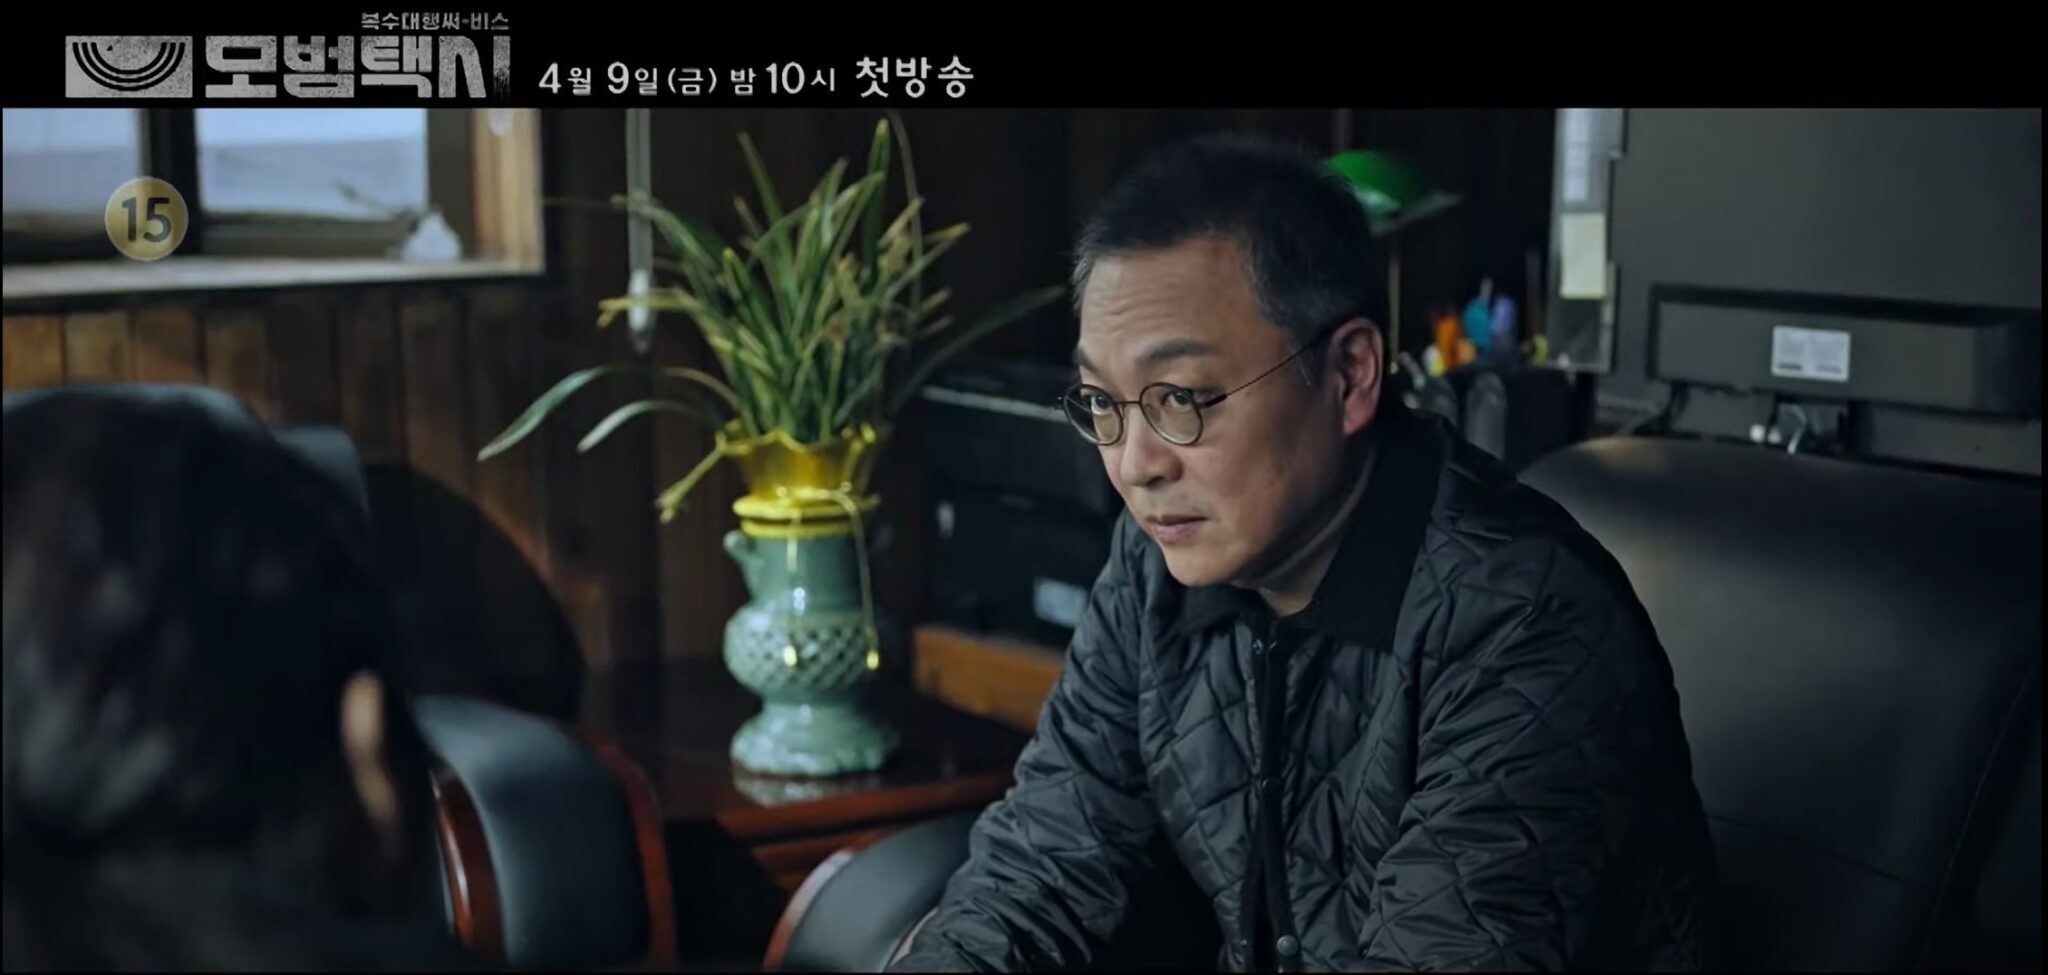 Taxi Driver Serves Vigilante Justice In New Teaser With Lee Je Hoon Kim Eui Sung And Esom 5289